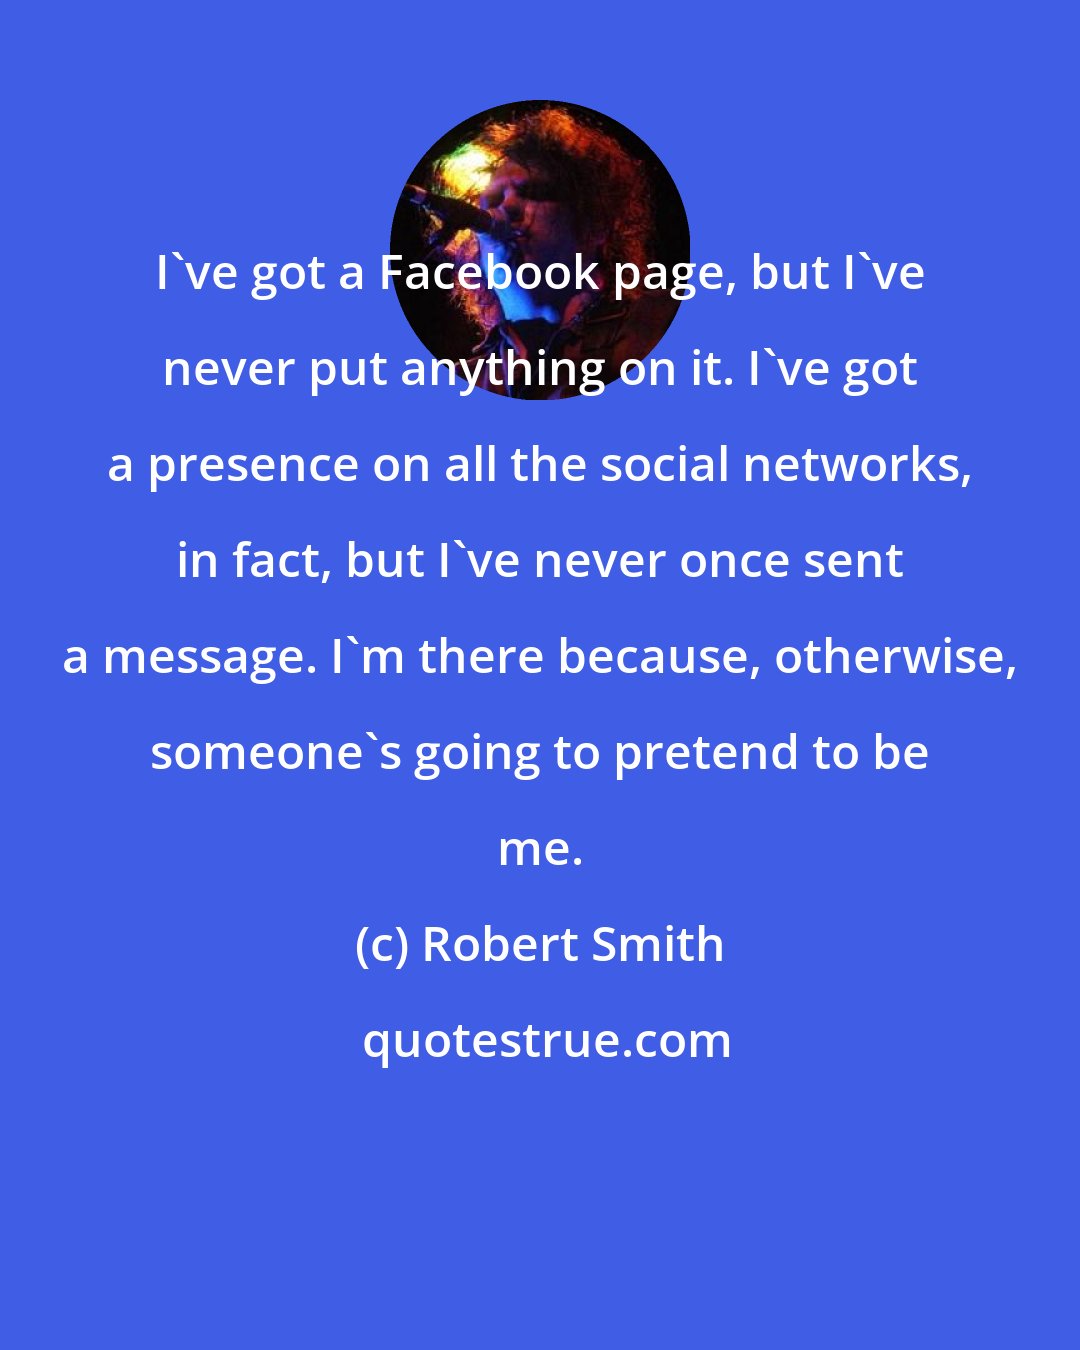 Robert Smith: I've got a Facebook page, but I've never put anything on it. I've got a presence on all the social networks, in fact, but I've never once sent a message. I'm there because, otherwise, someone's going to pretend to be me.